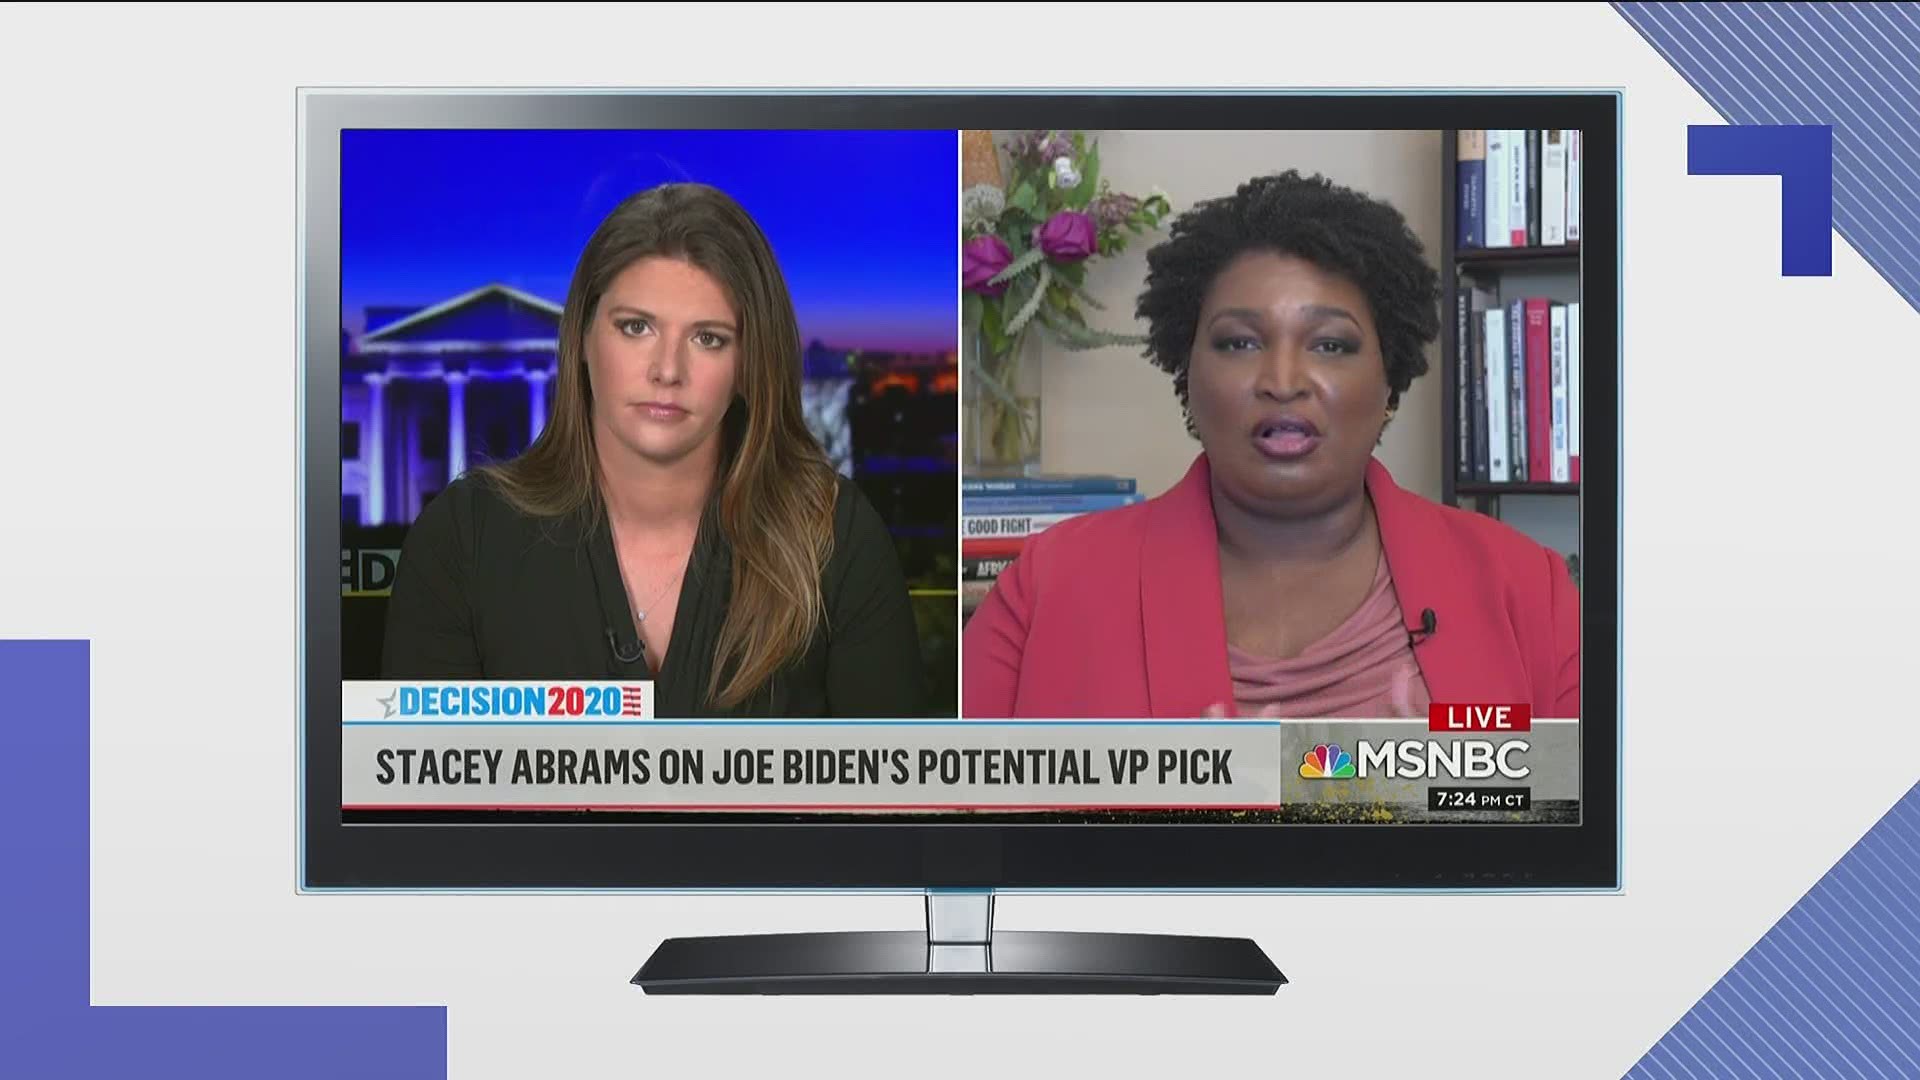 Both Stacey Abrams and Mayor Keisha Lance Bottoms both deferred to Biden's team.